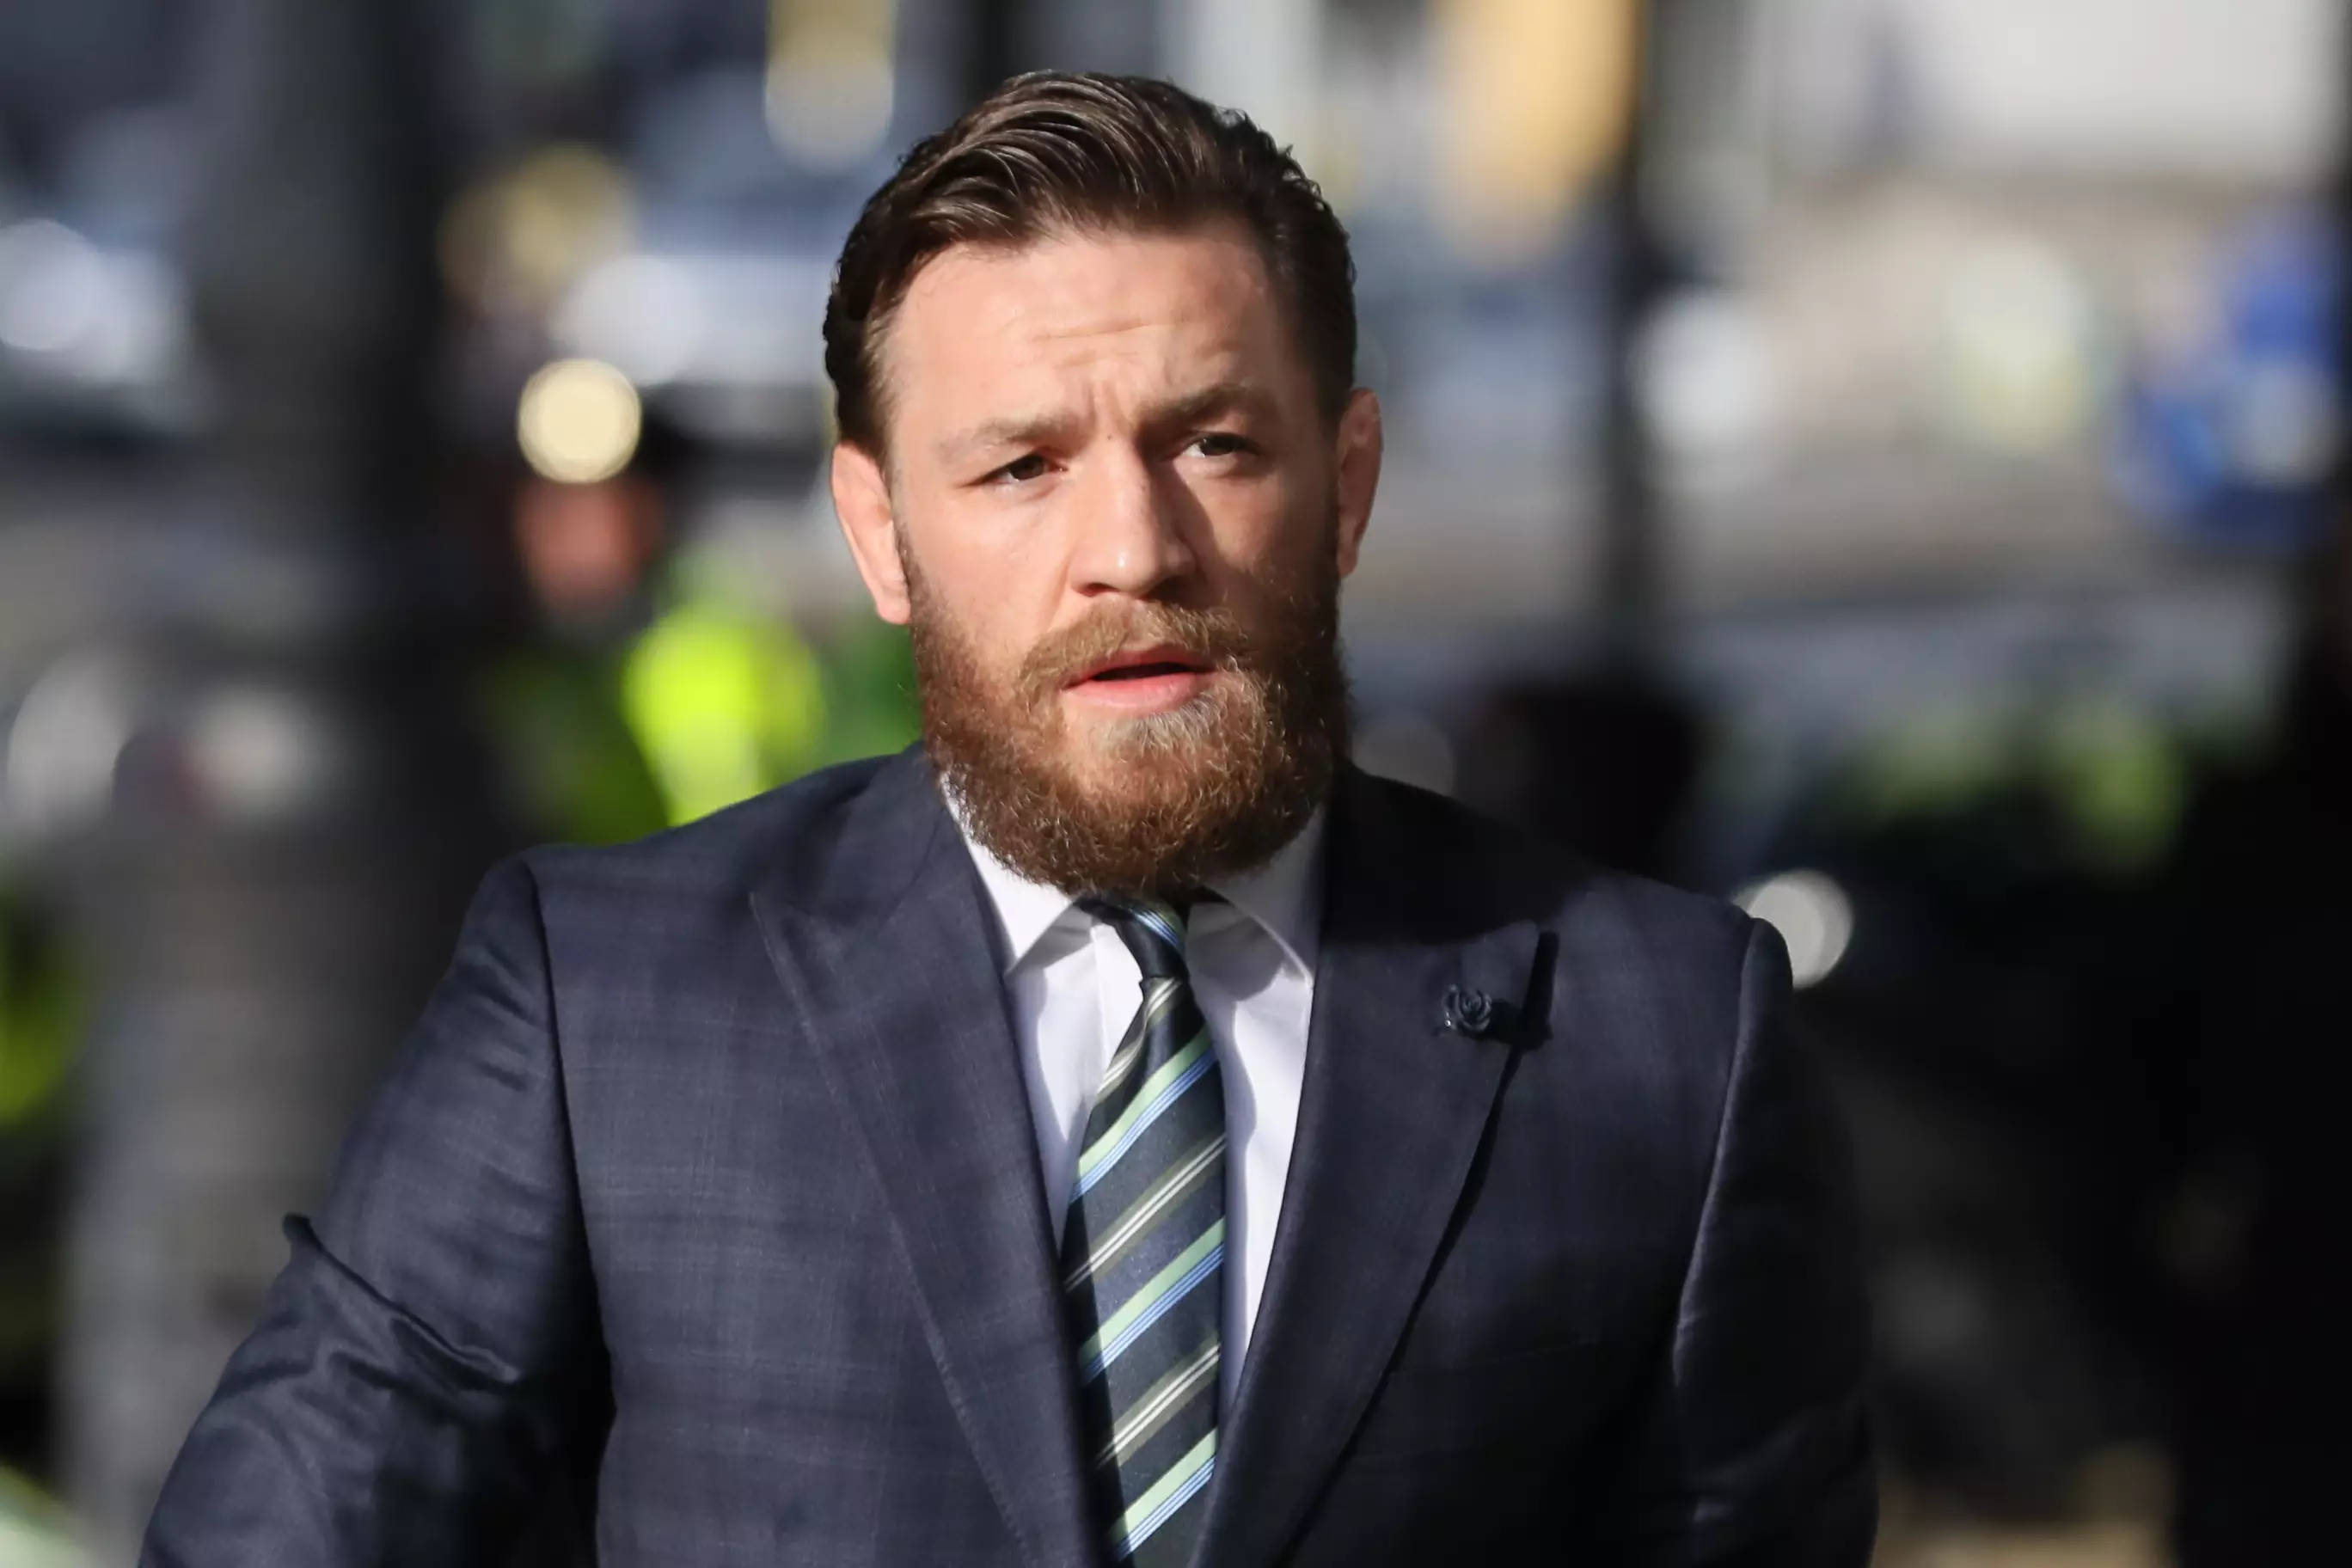 Conor McGregor seemed to be annoyed with some comments from UFC boss Dana White